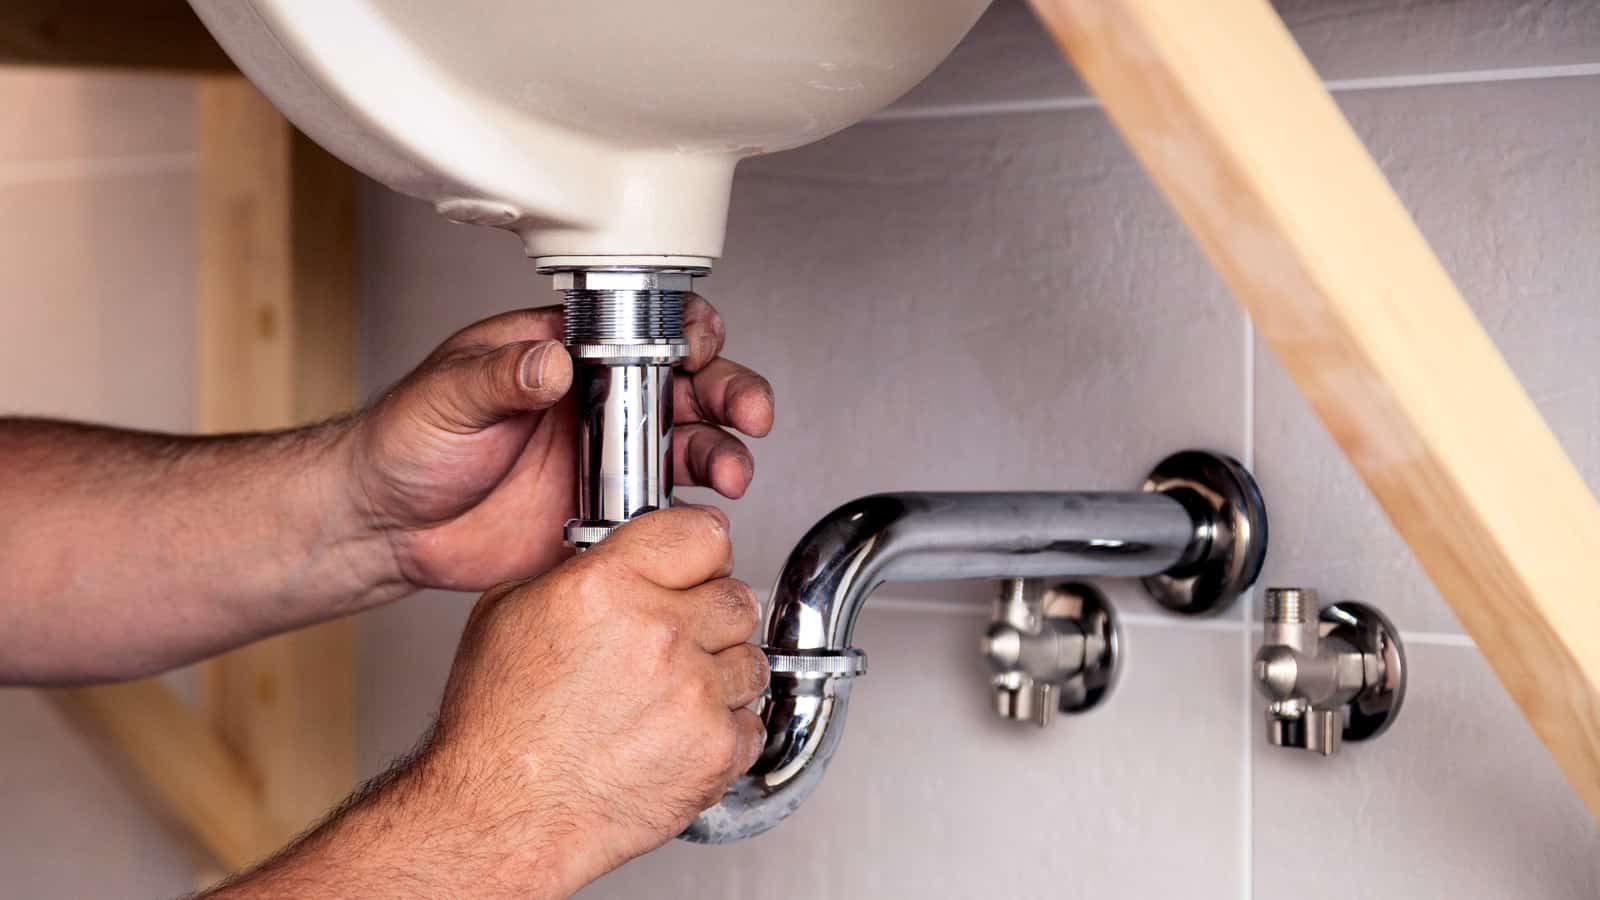 Roto Rooter Plumbing And Water Cleanup of Pompano Beach